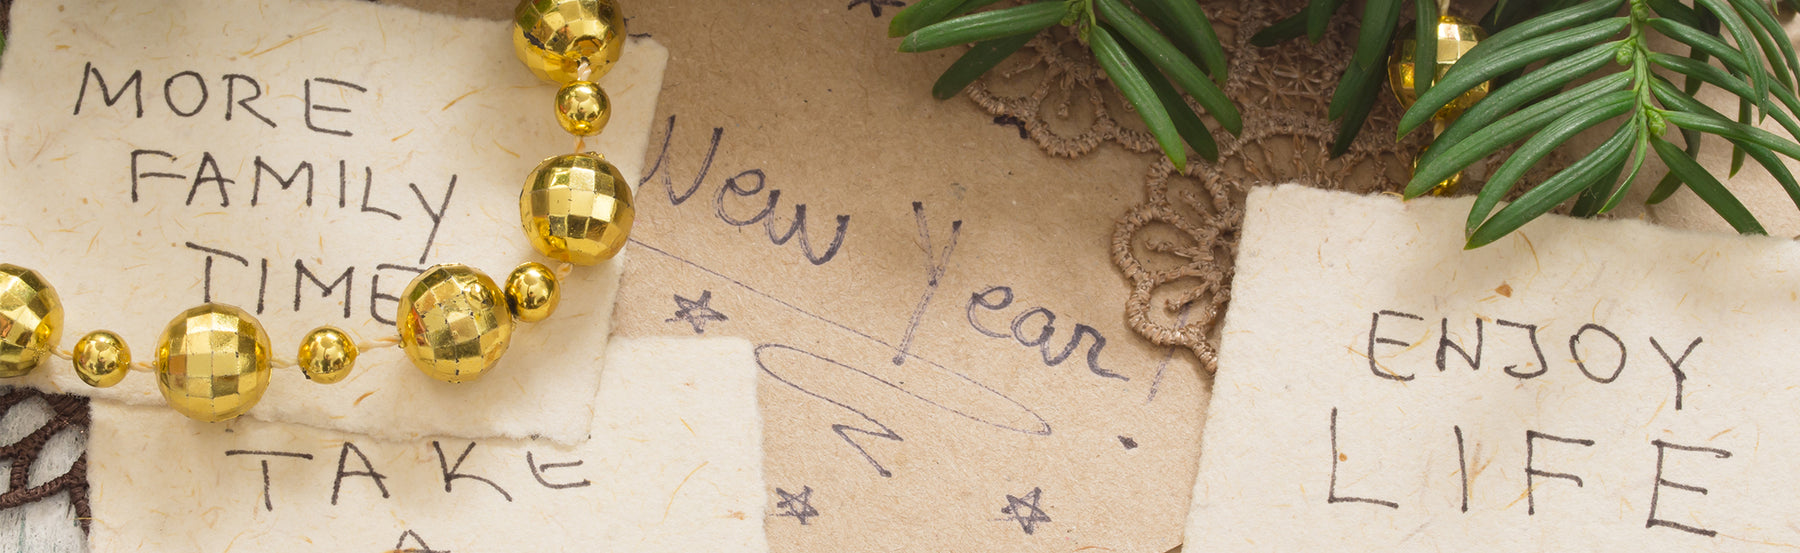 How to Make Healthy New Year’s Resolutions You Can Stick With